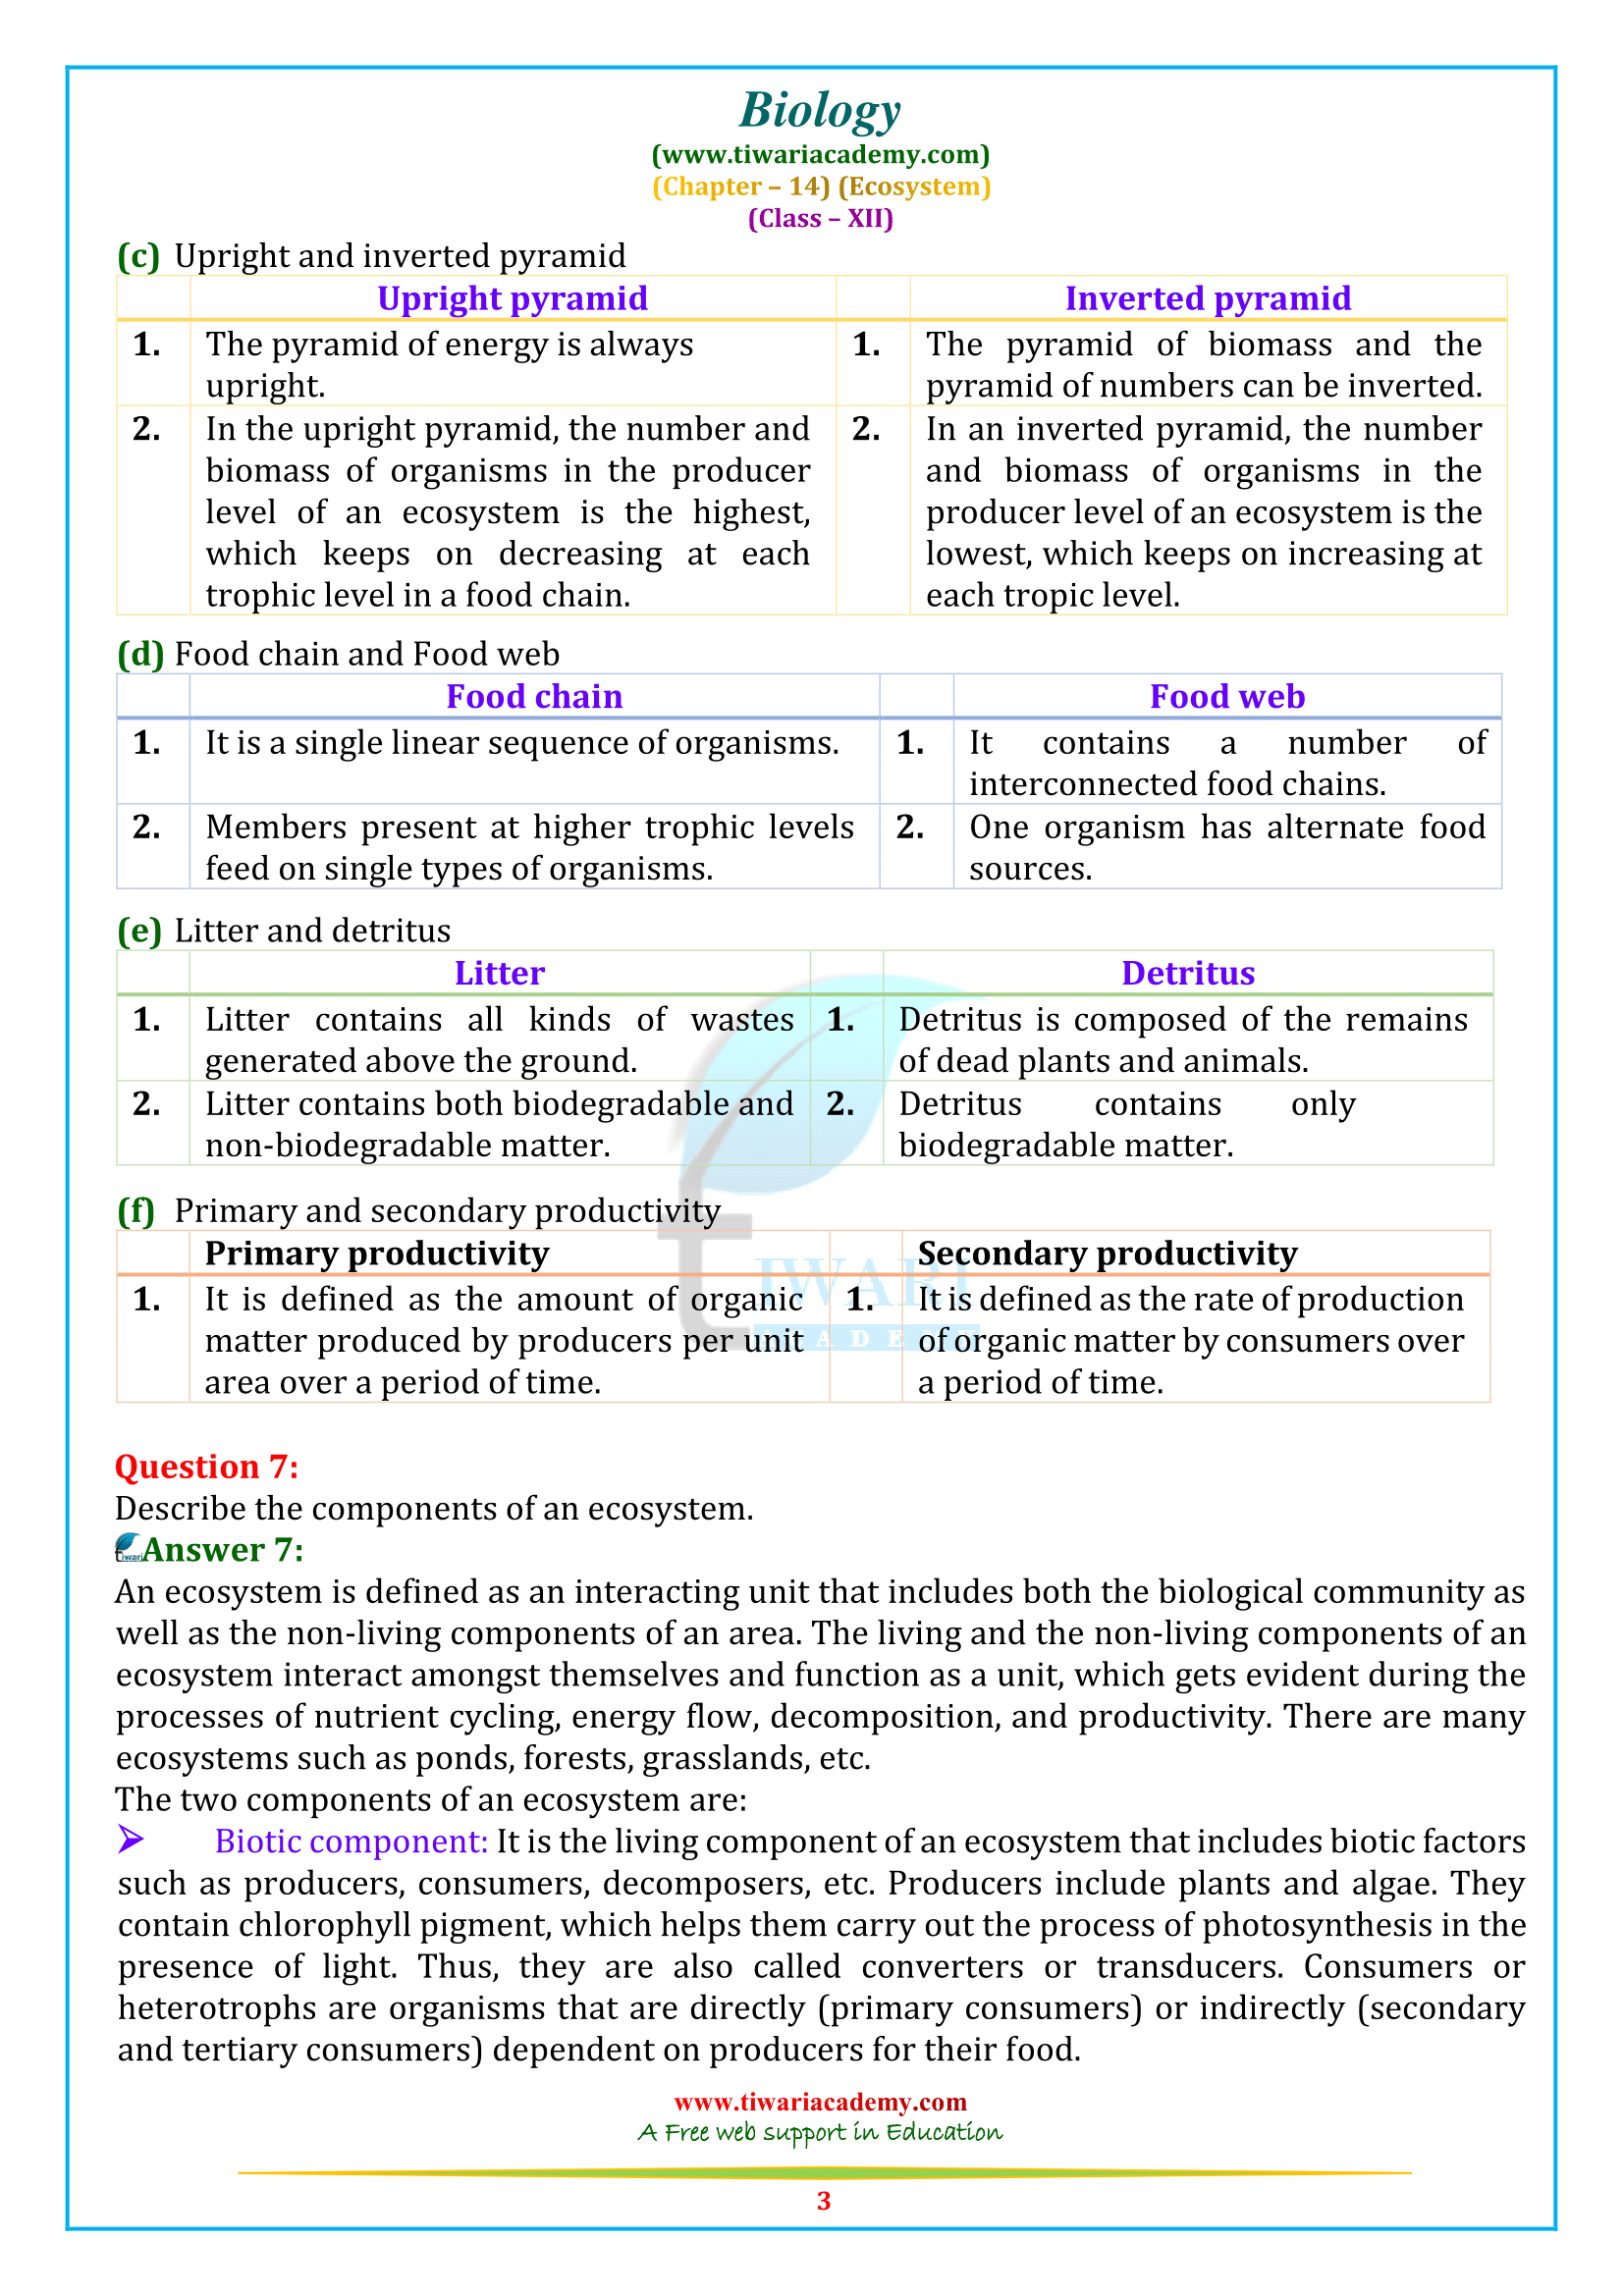 NCERT Solutions for Class 12 Biology Chapter 14 in PDF